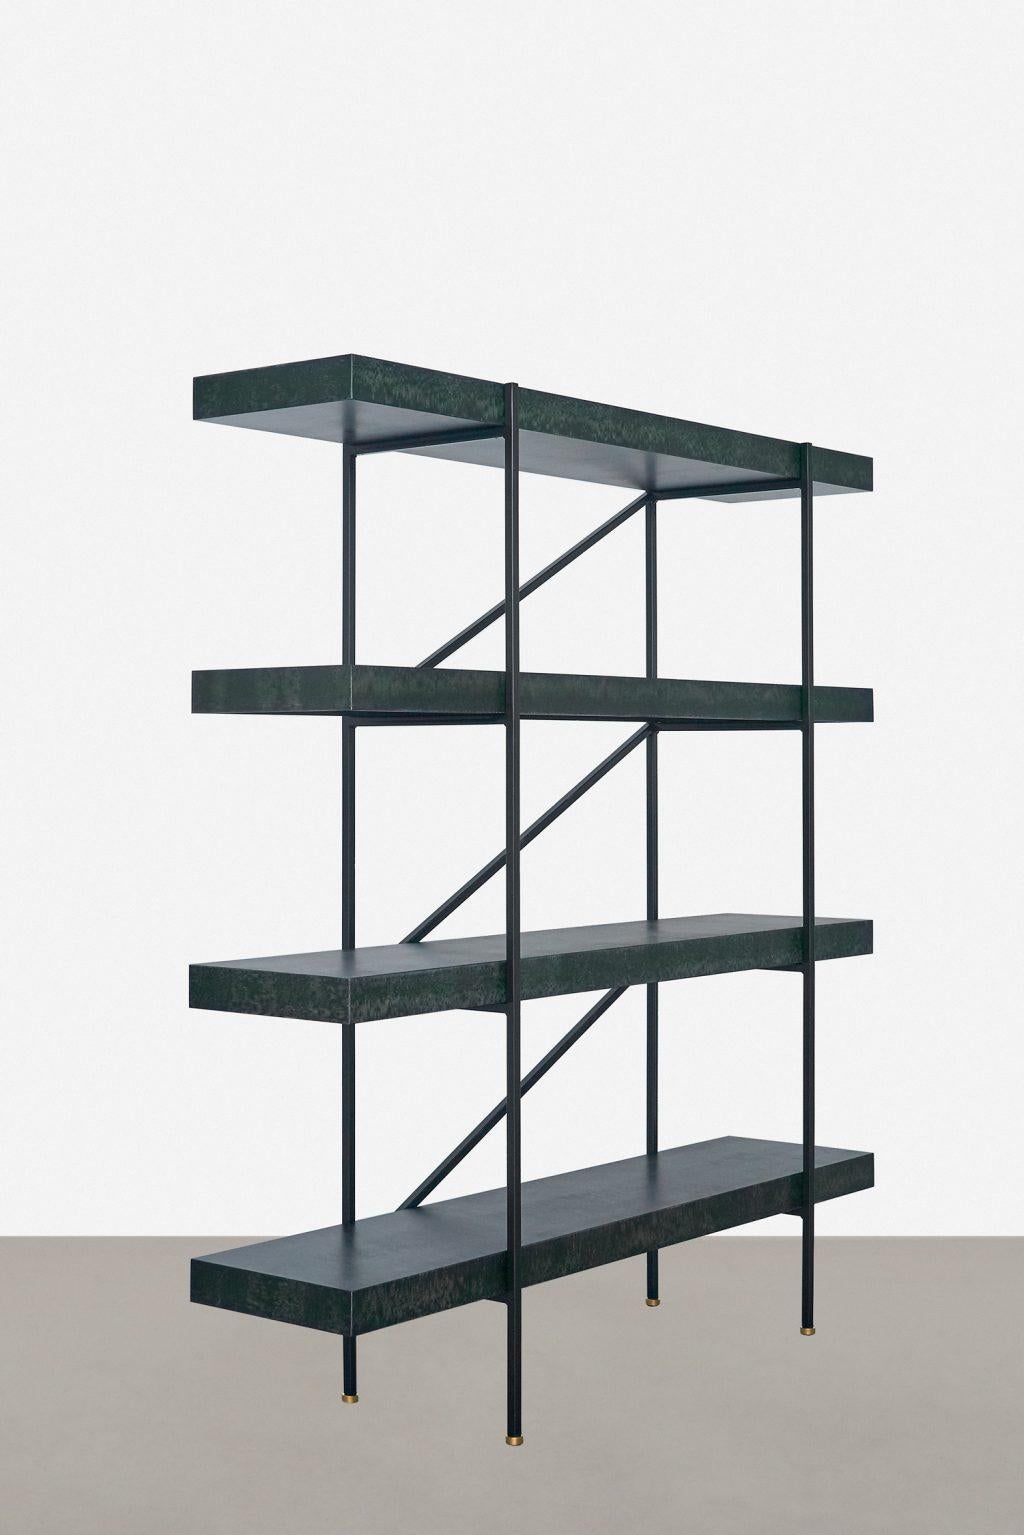 Osis shelving by Llot Llov
Edition 2
Dimensions: W 140 x D 35 x H 175 cm
Materials: Core board birch, powder coated steel 

LLOT LLOV produce exclusive furniture and objects for private or corporate clients and also manage interior design projects